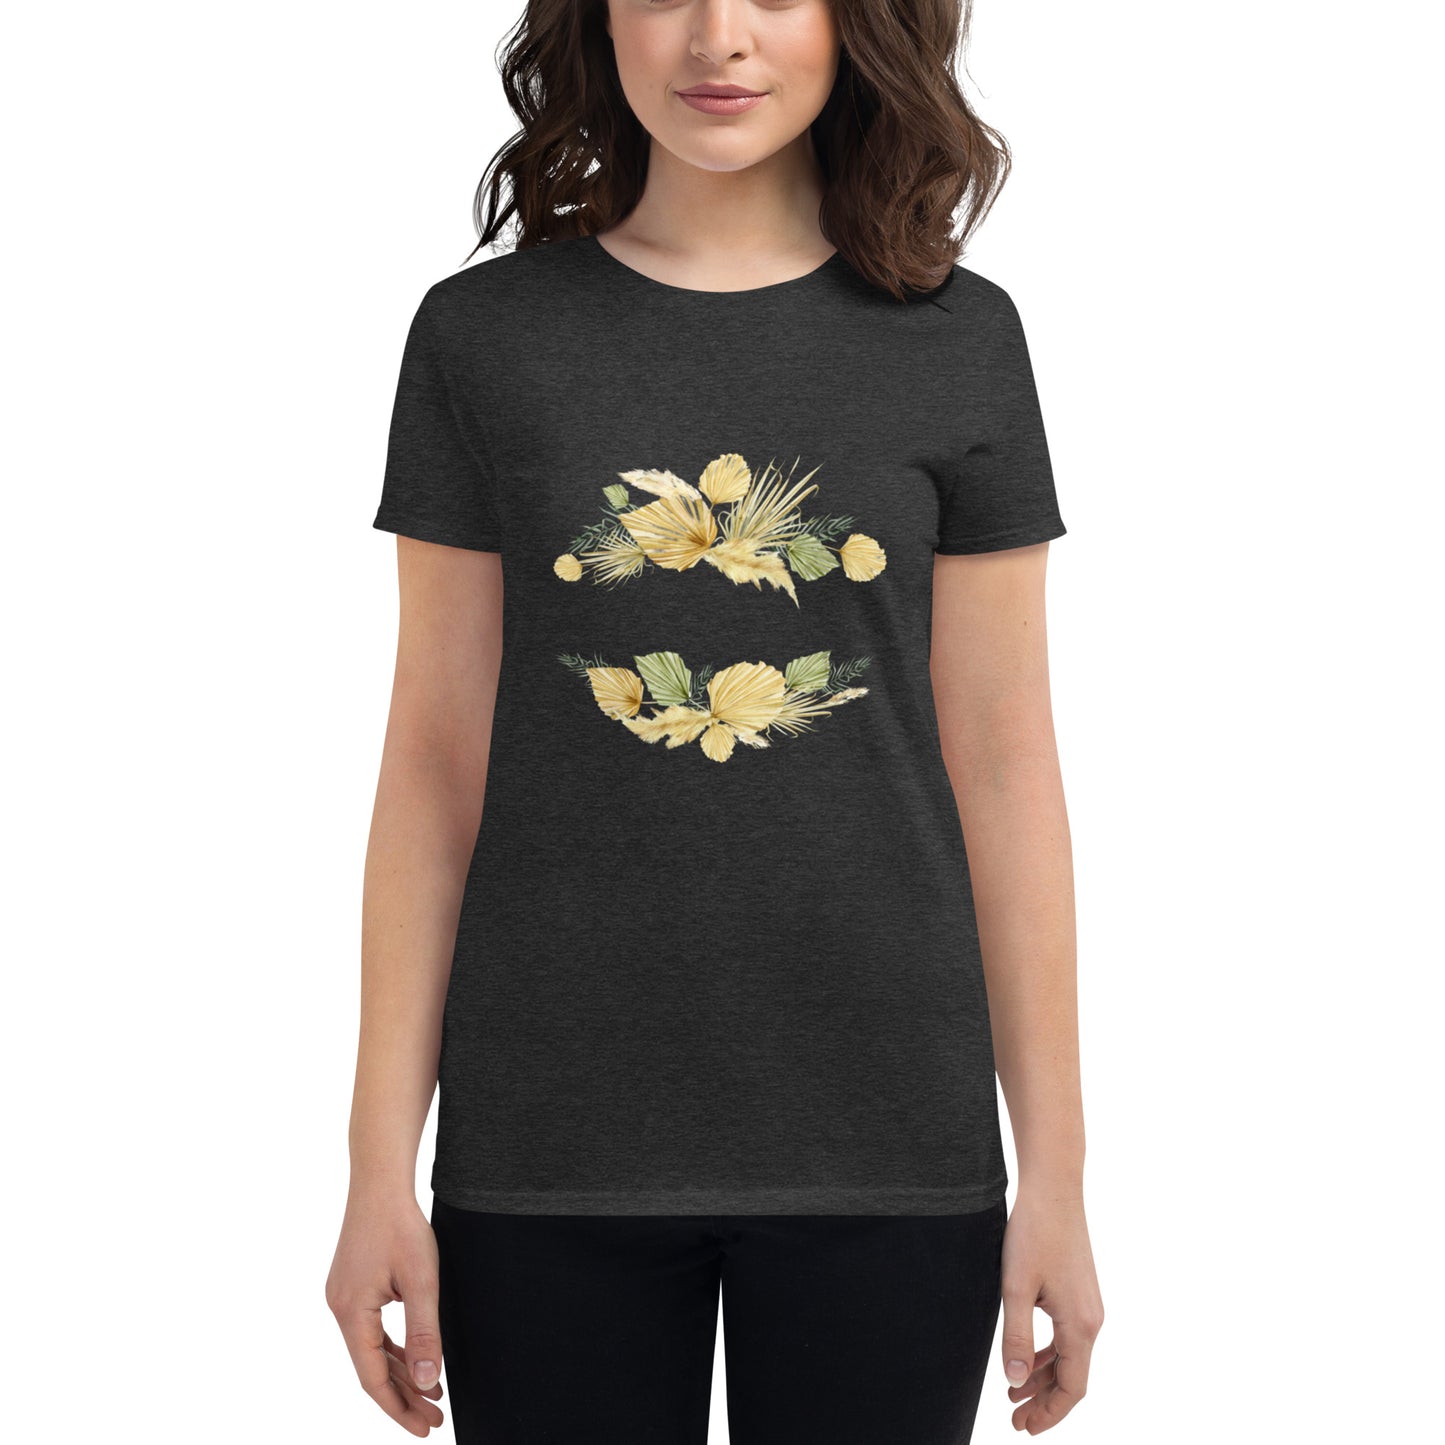 Floral-Designed Short Sleeve Women's T-Shirt in Cotton & Cotton-Polyester Blends